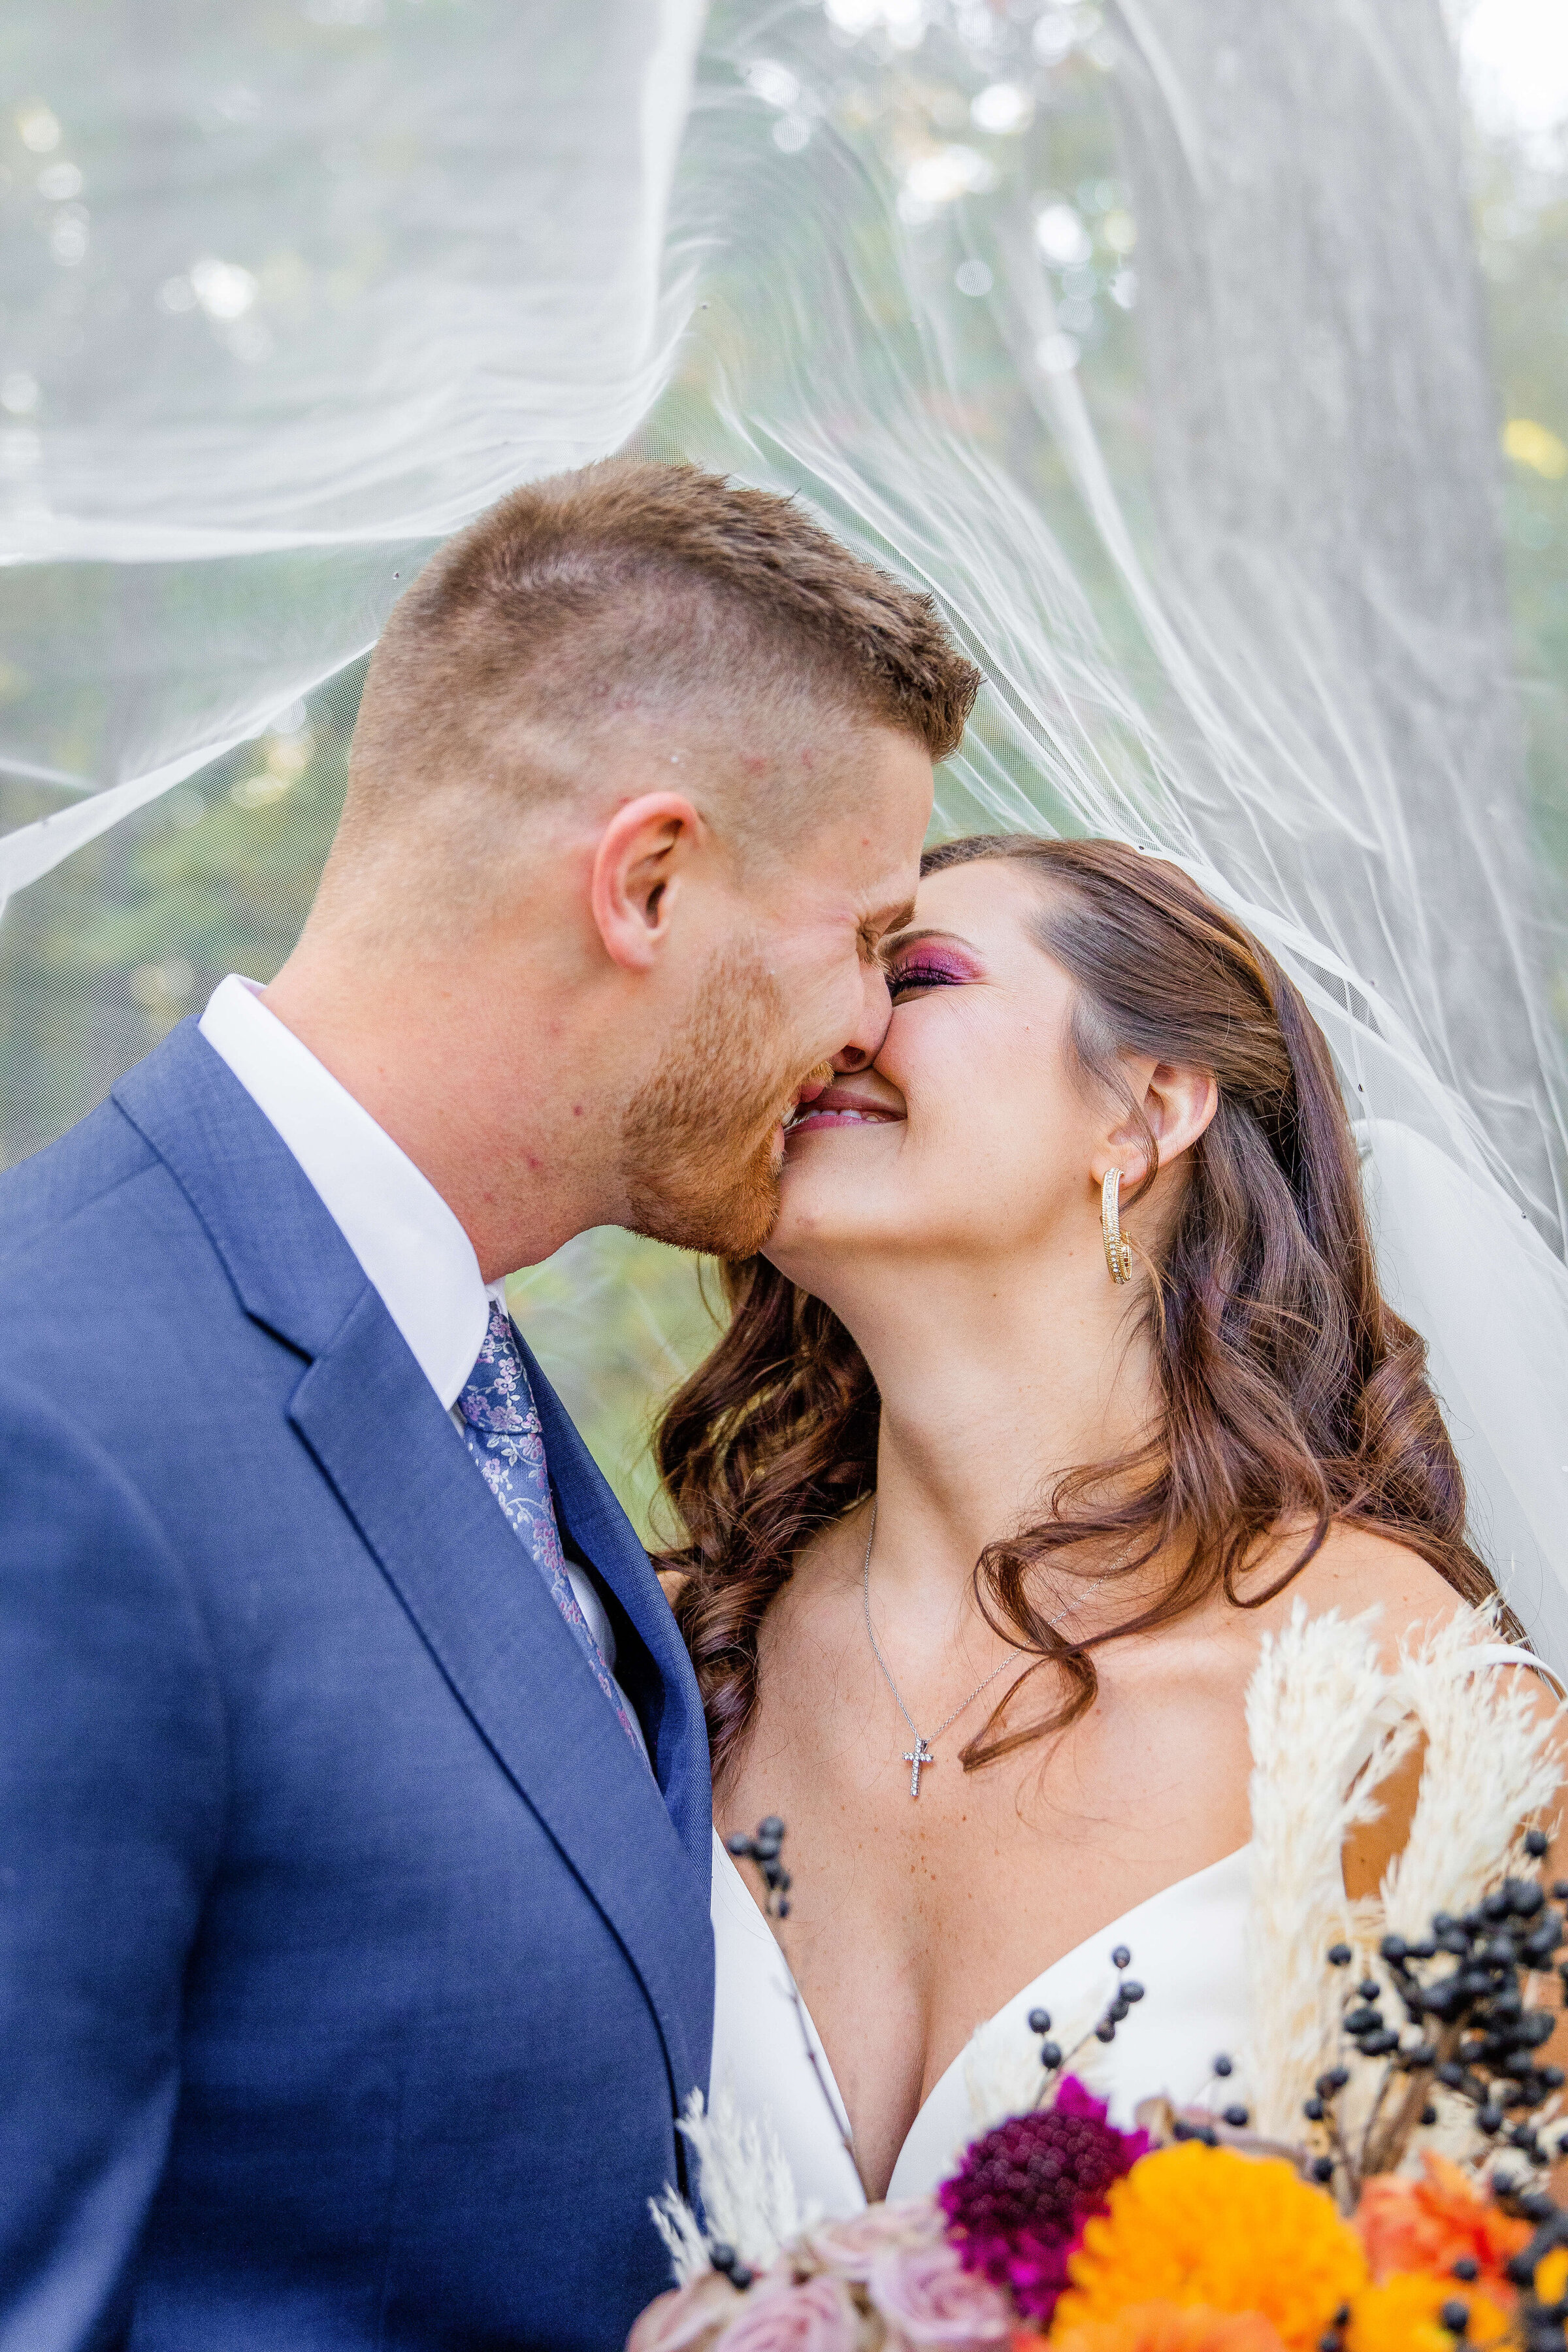 A bride and groom laugh while they kiss and she has her veil over their heads. She is holding a fall colors inspired bouquet